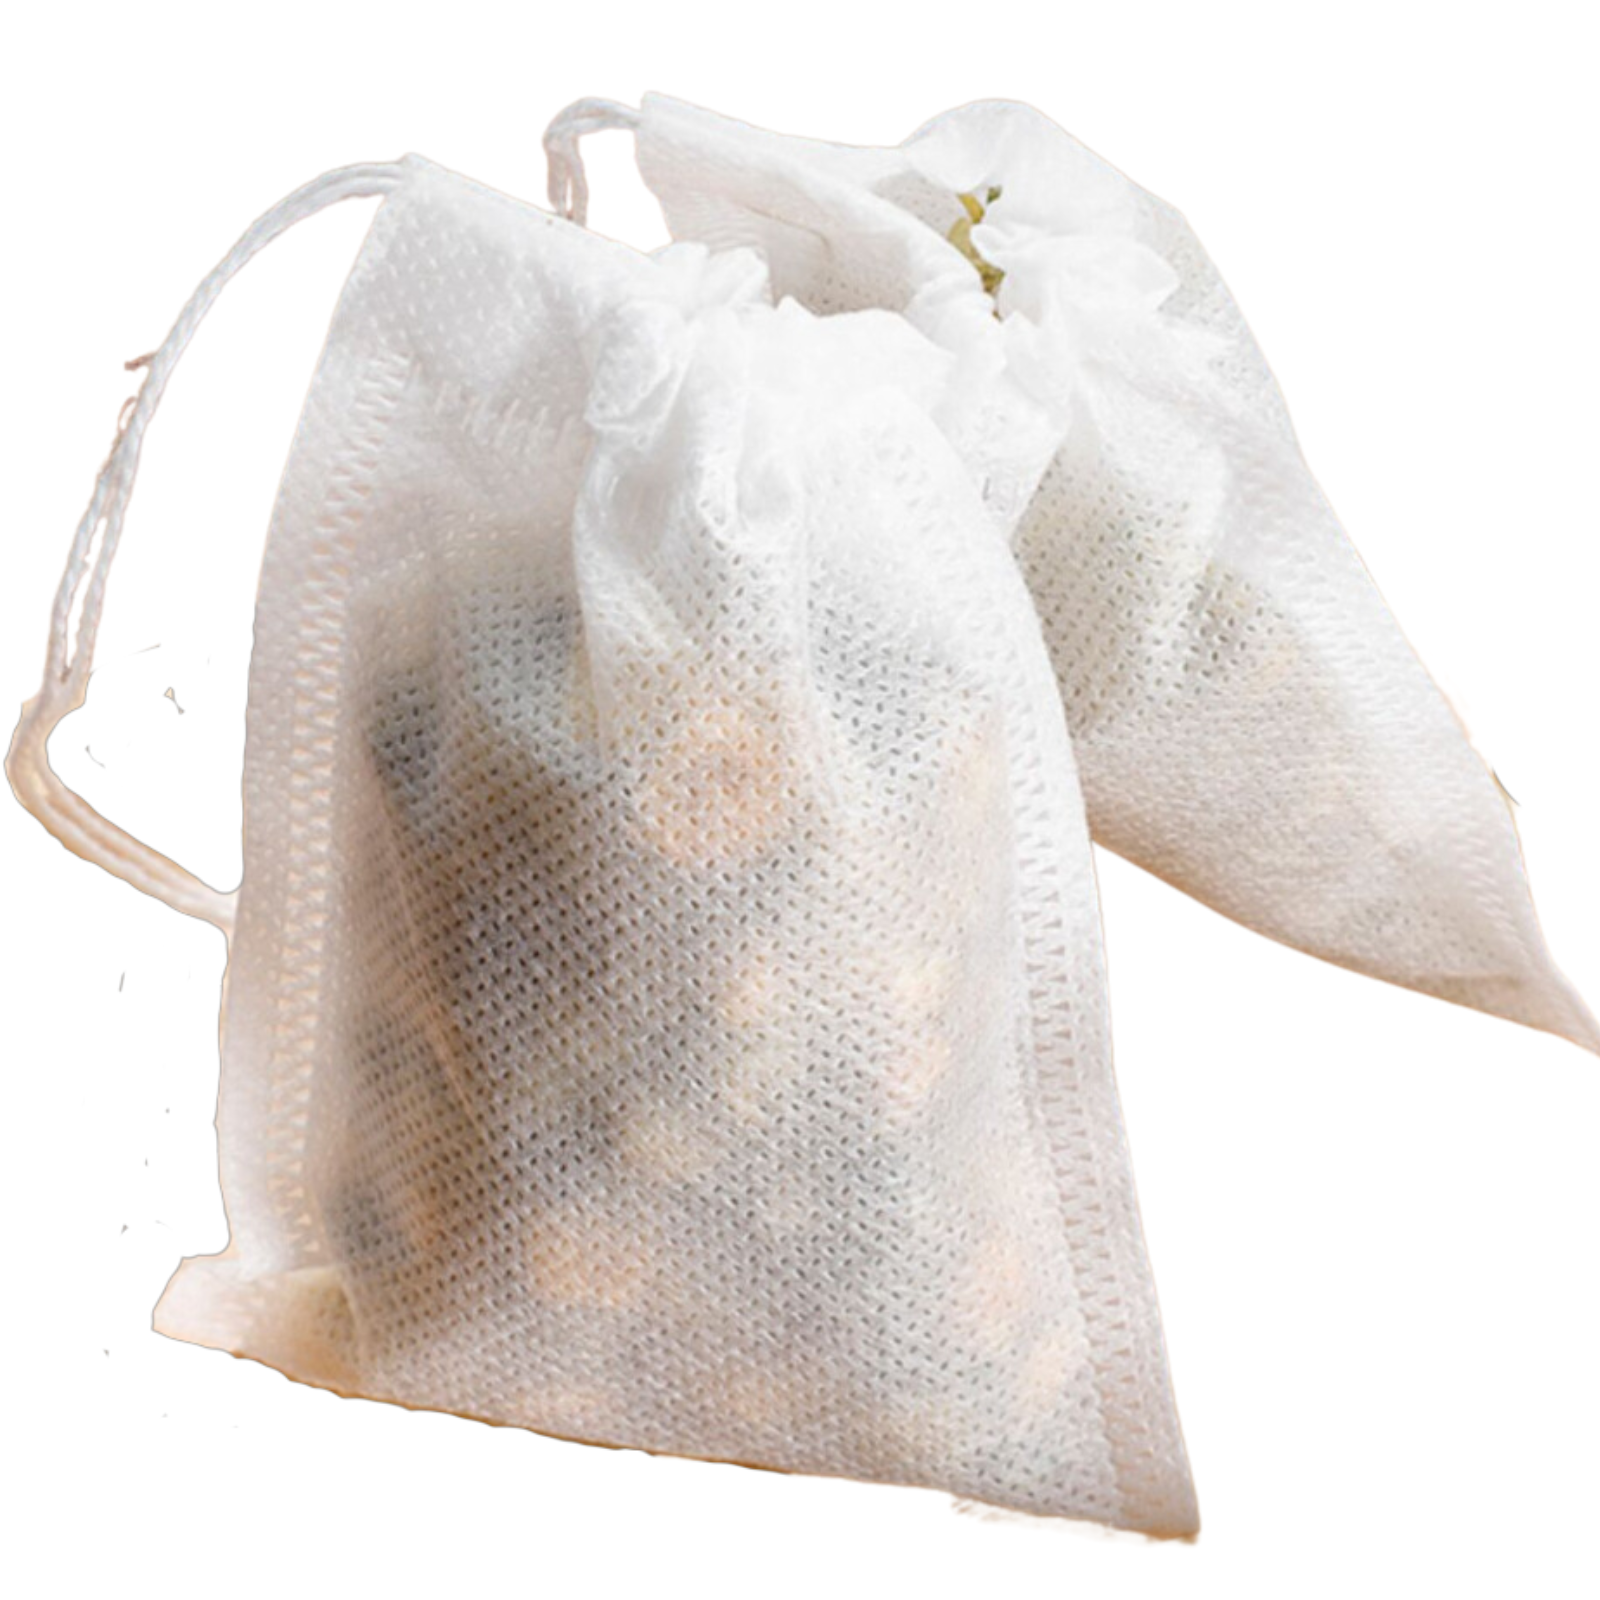 Disposable Drawstring Filter Bags for Spices, Herbs, Tea, Coffee, and Cooking (100 Count)